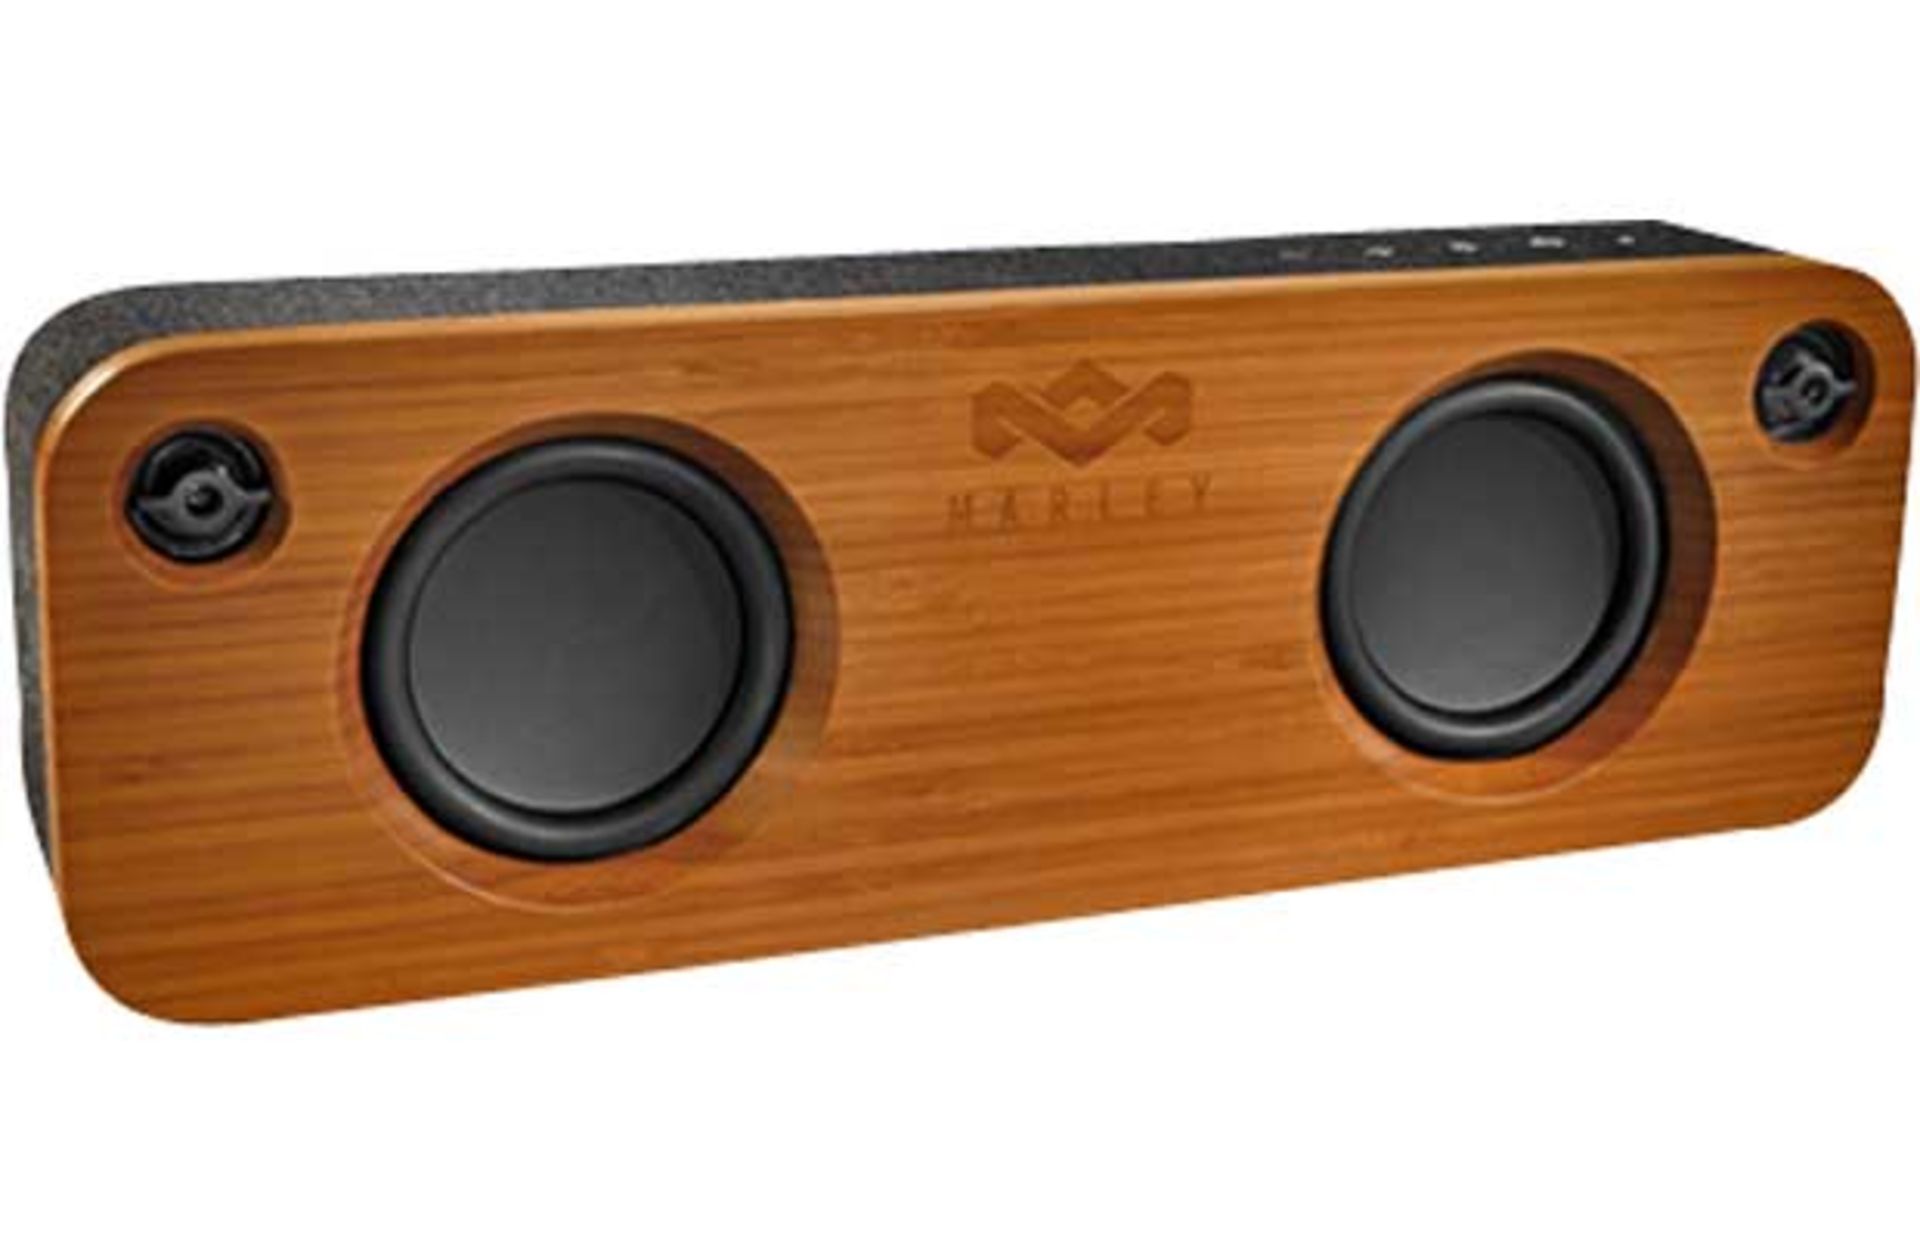 V Grade A Marley Get It Together Portable Audio System - Bluetooth - 8 Hour Battery - Exclusive - Image 4 of 4